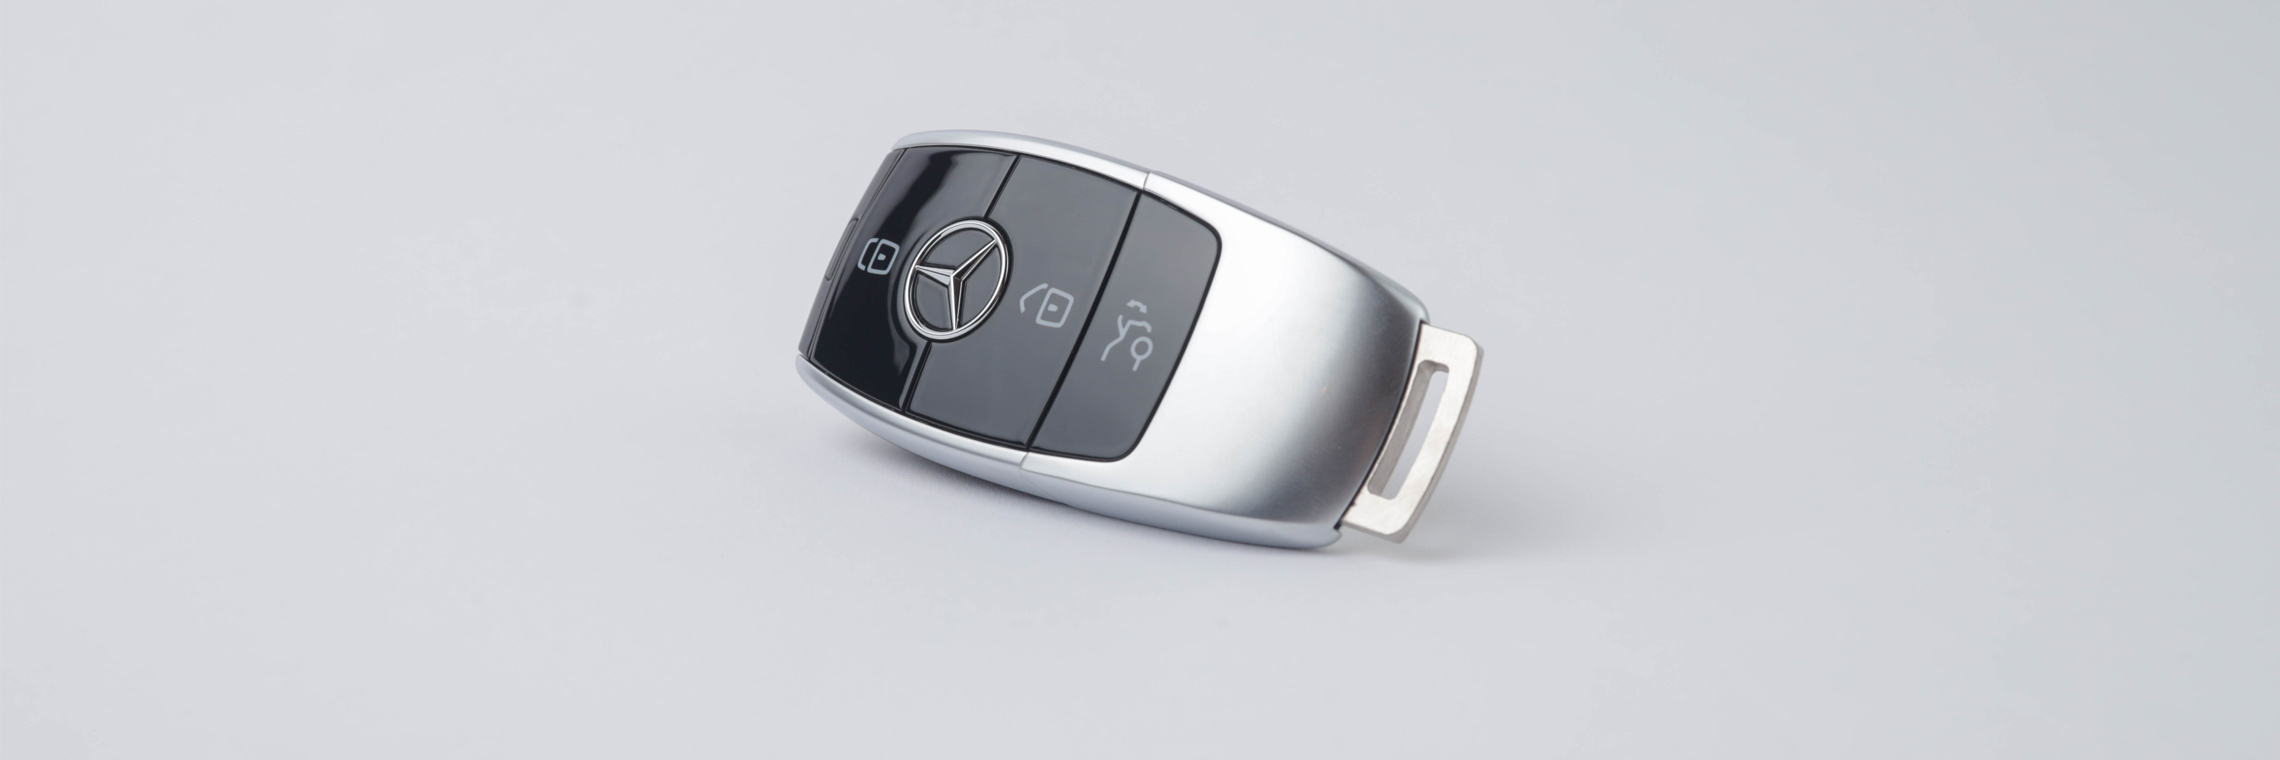 Mercedes Benz Car Key Replacement: Why You Need a Locksmith